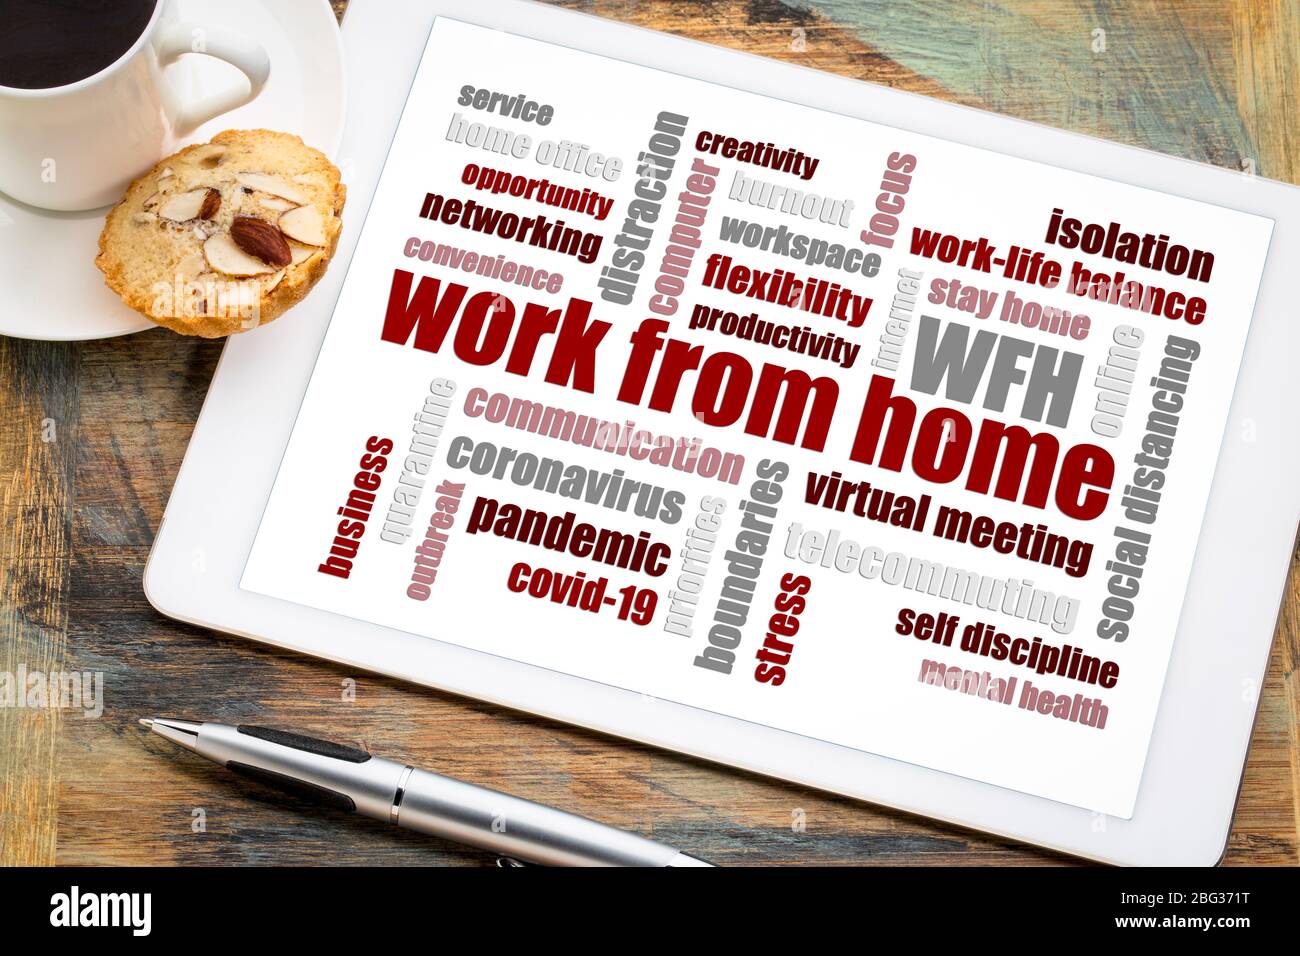 work from home word cloud on a digital tablet with a cup of coffee, social distancing, self quarantine and stay-at-home order during covid-19 coronavi Stock Photo